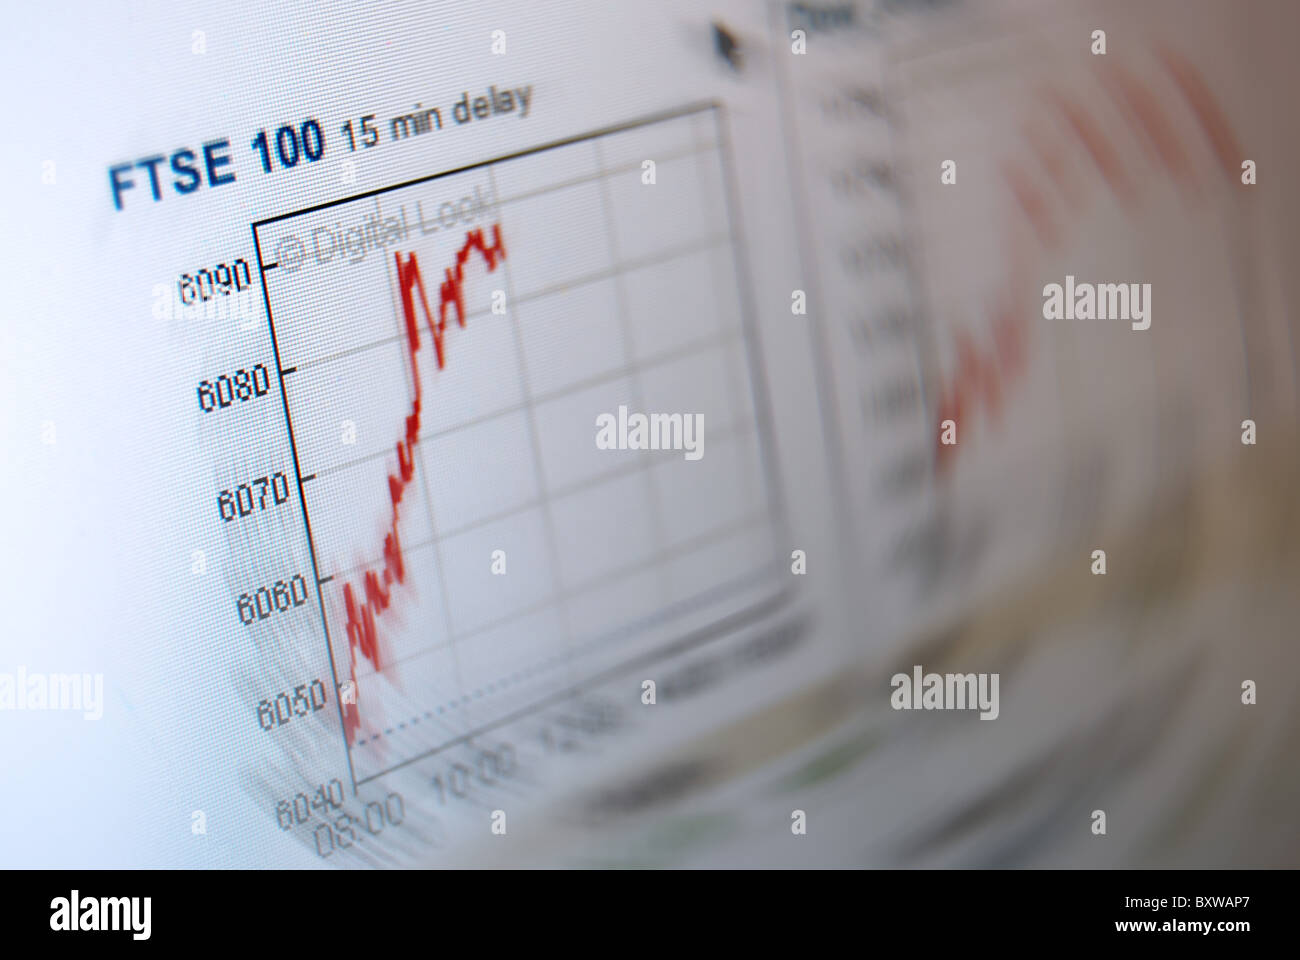 A photo illustration of the BBC news website showing FTSE 100 stocks Stock Photo